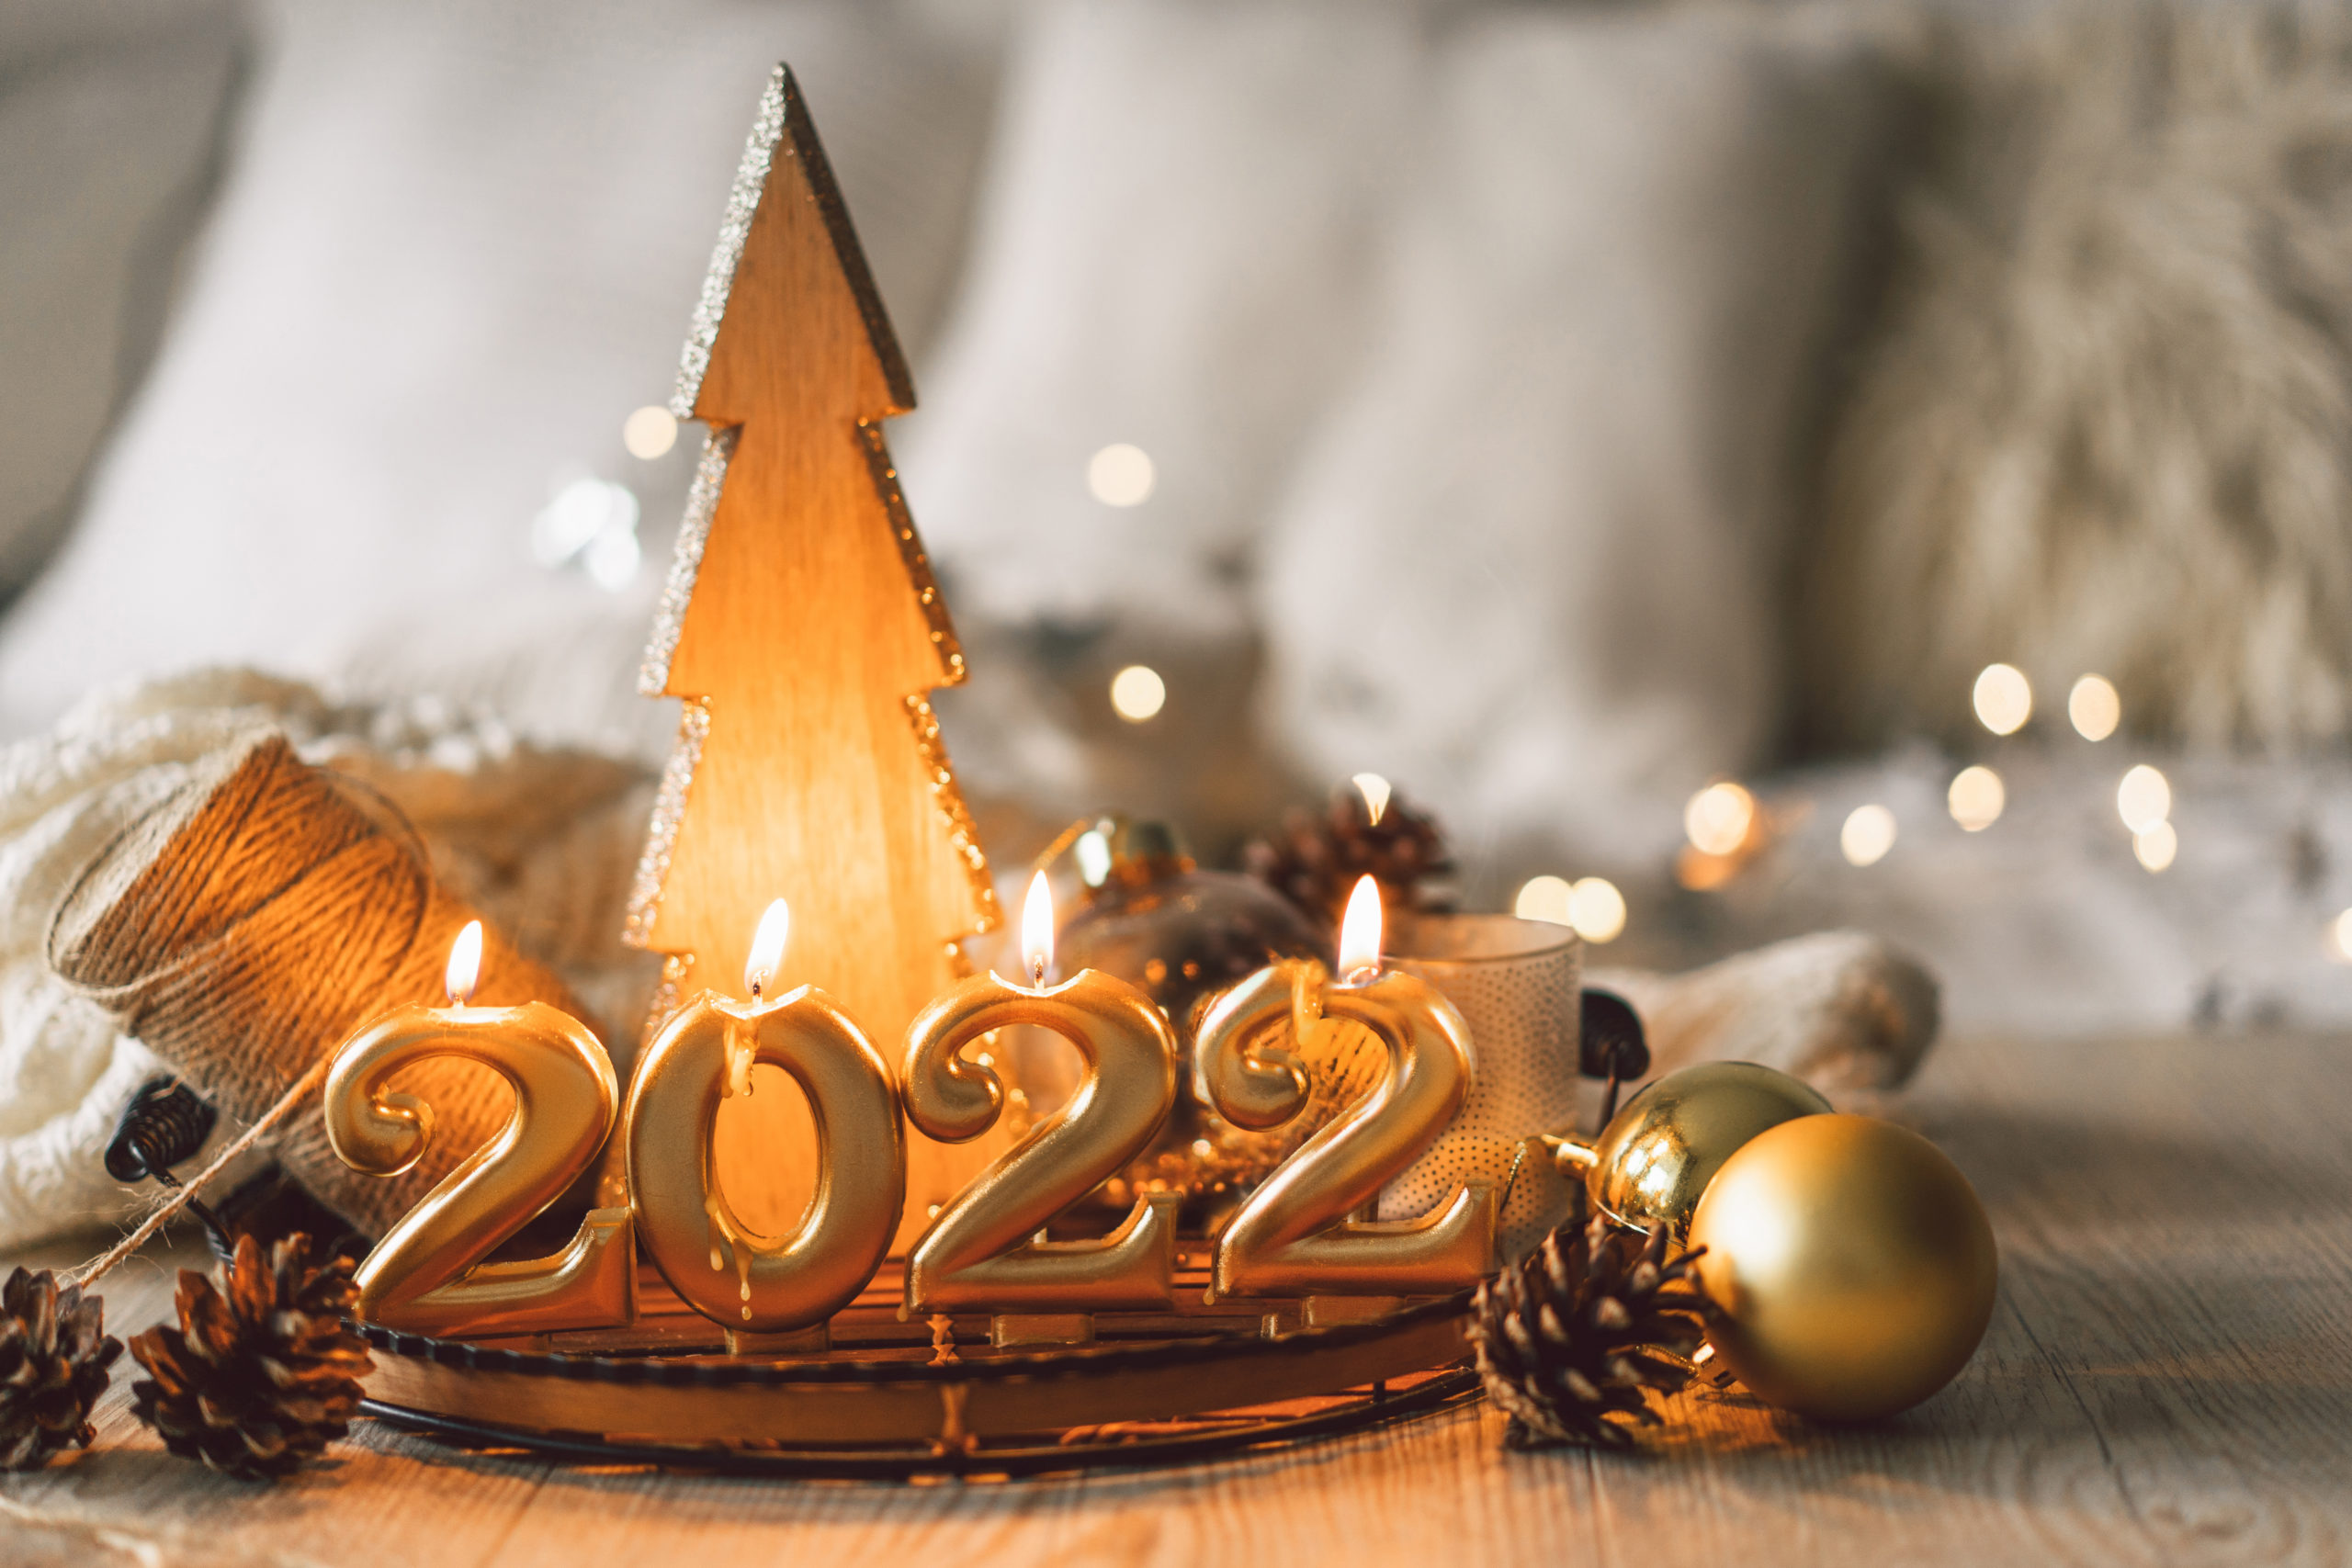 2022 Cyber Trends to Look Forward To